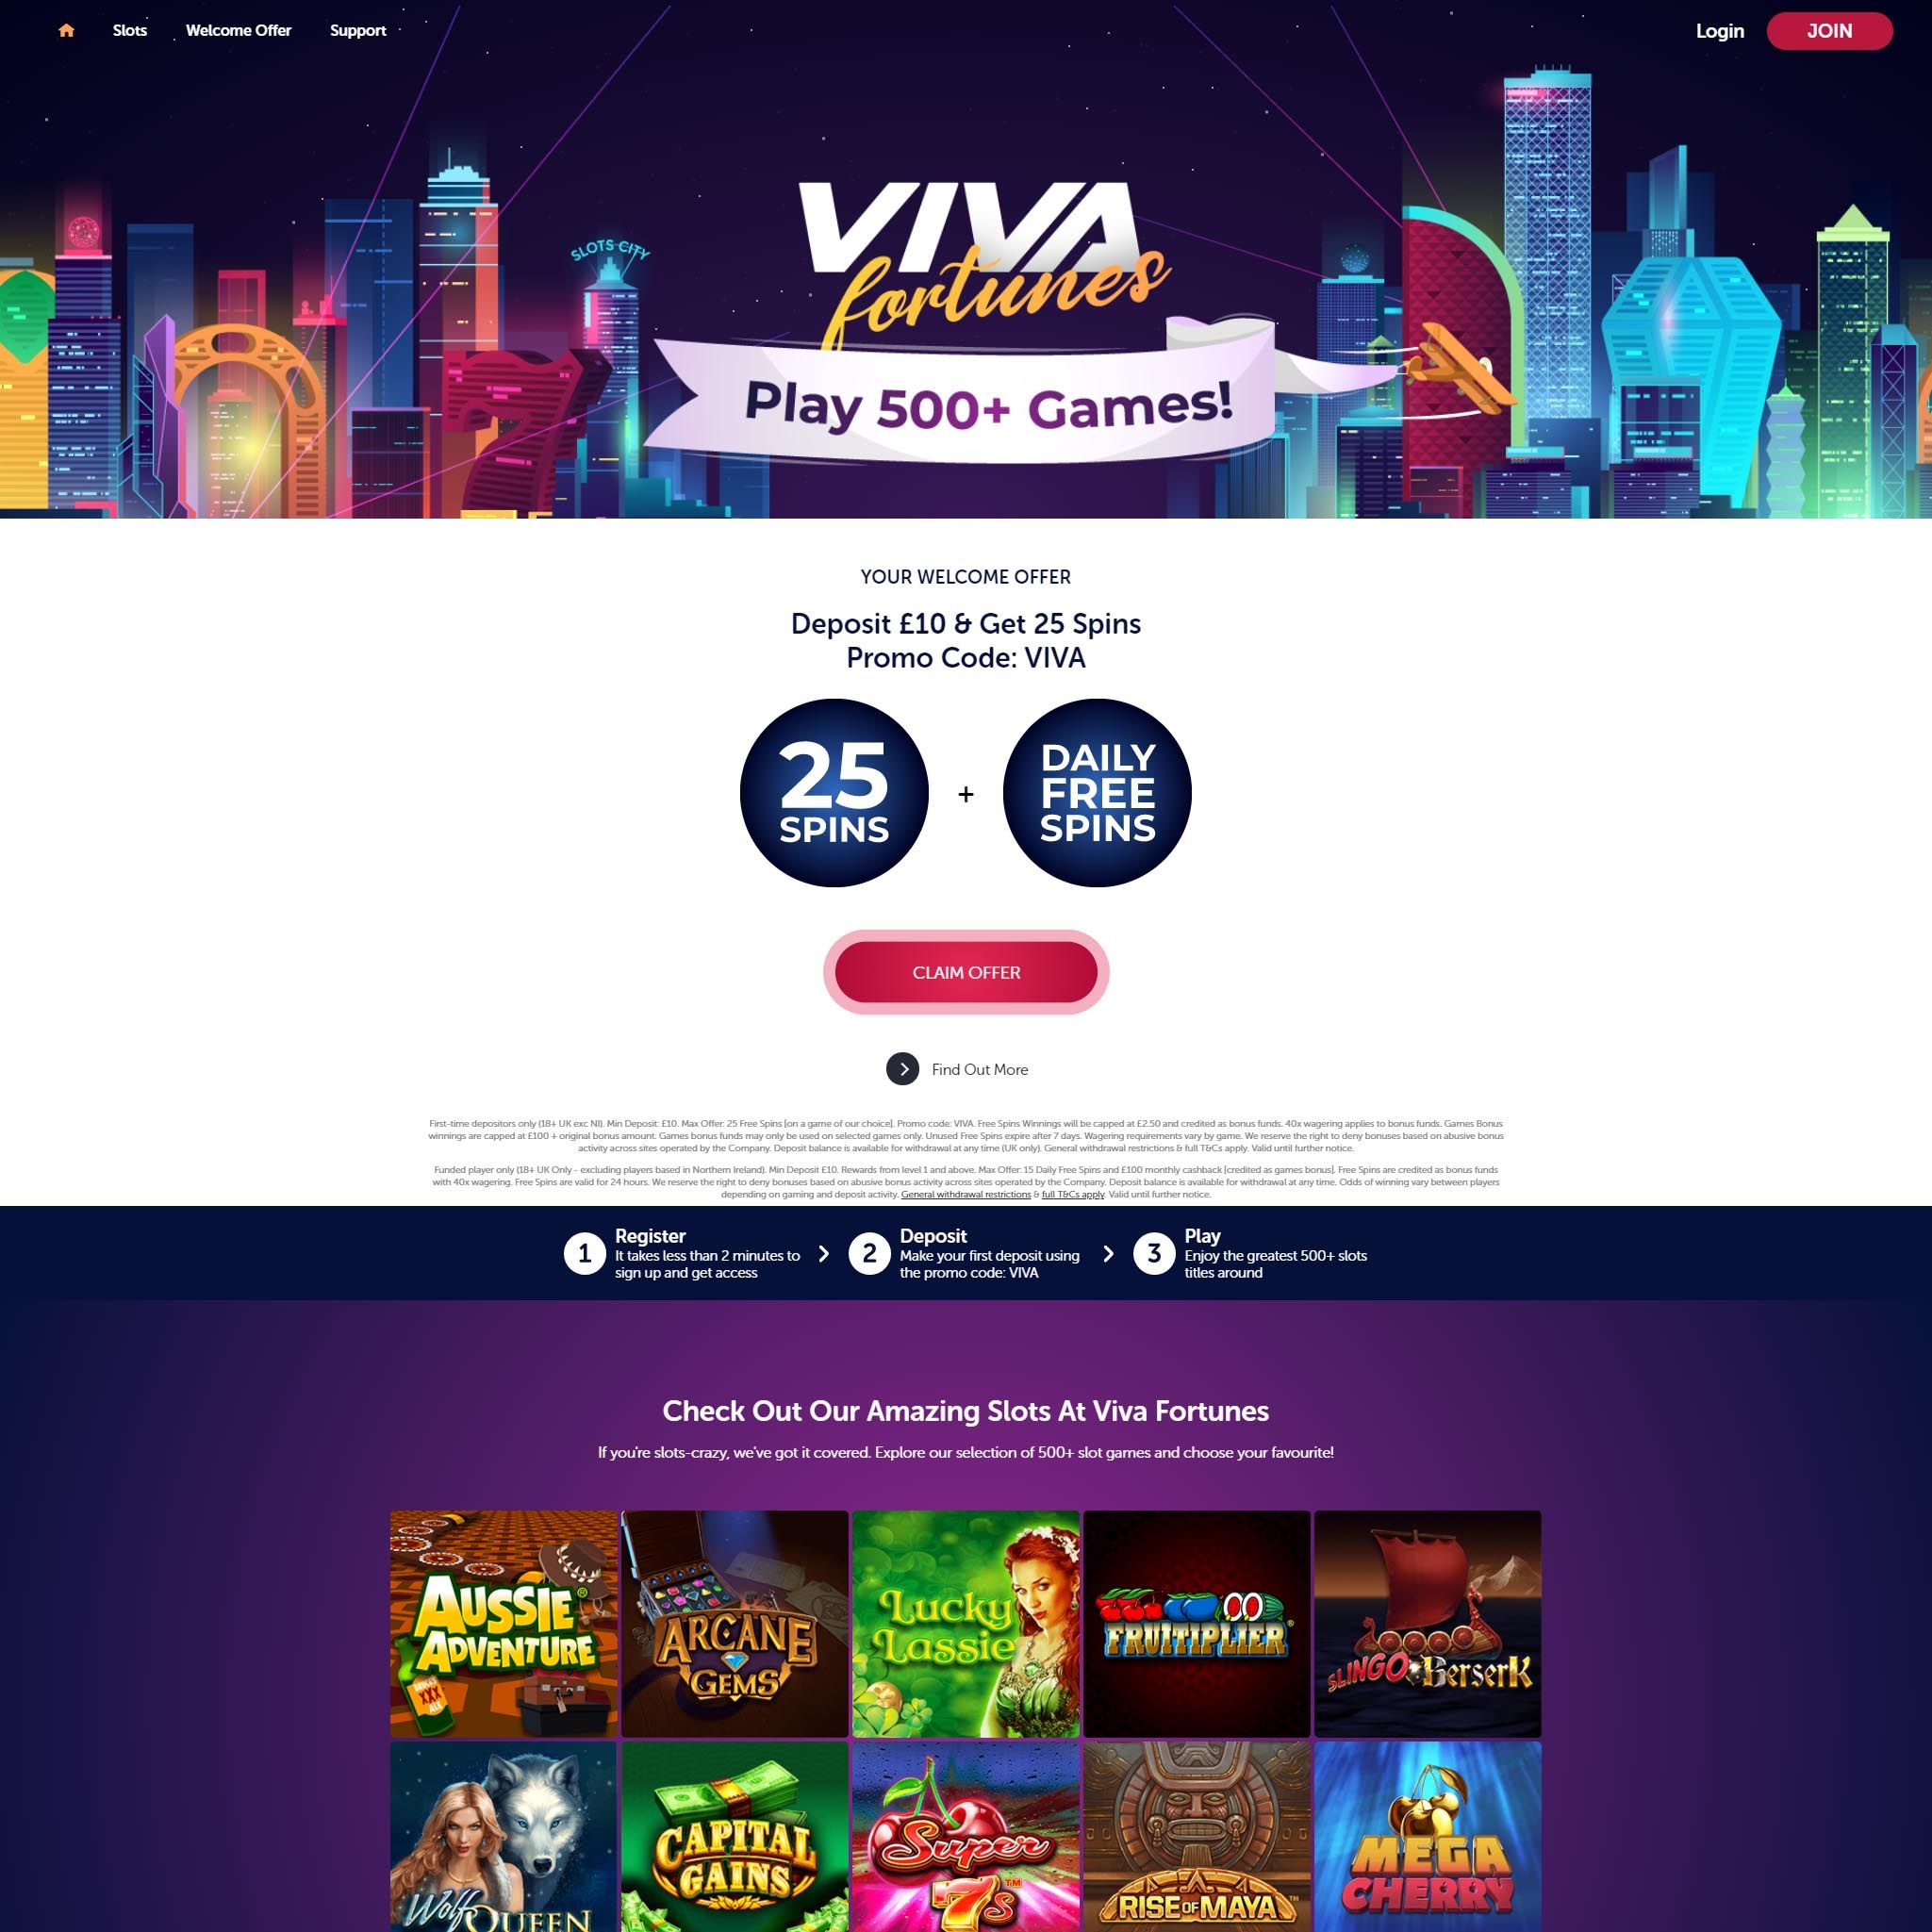 Viva Fortunes Casino UK review by Mr. Gamble